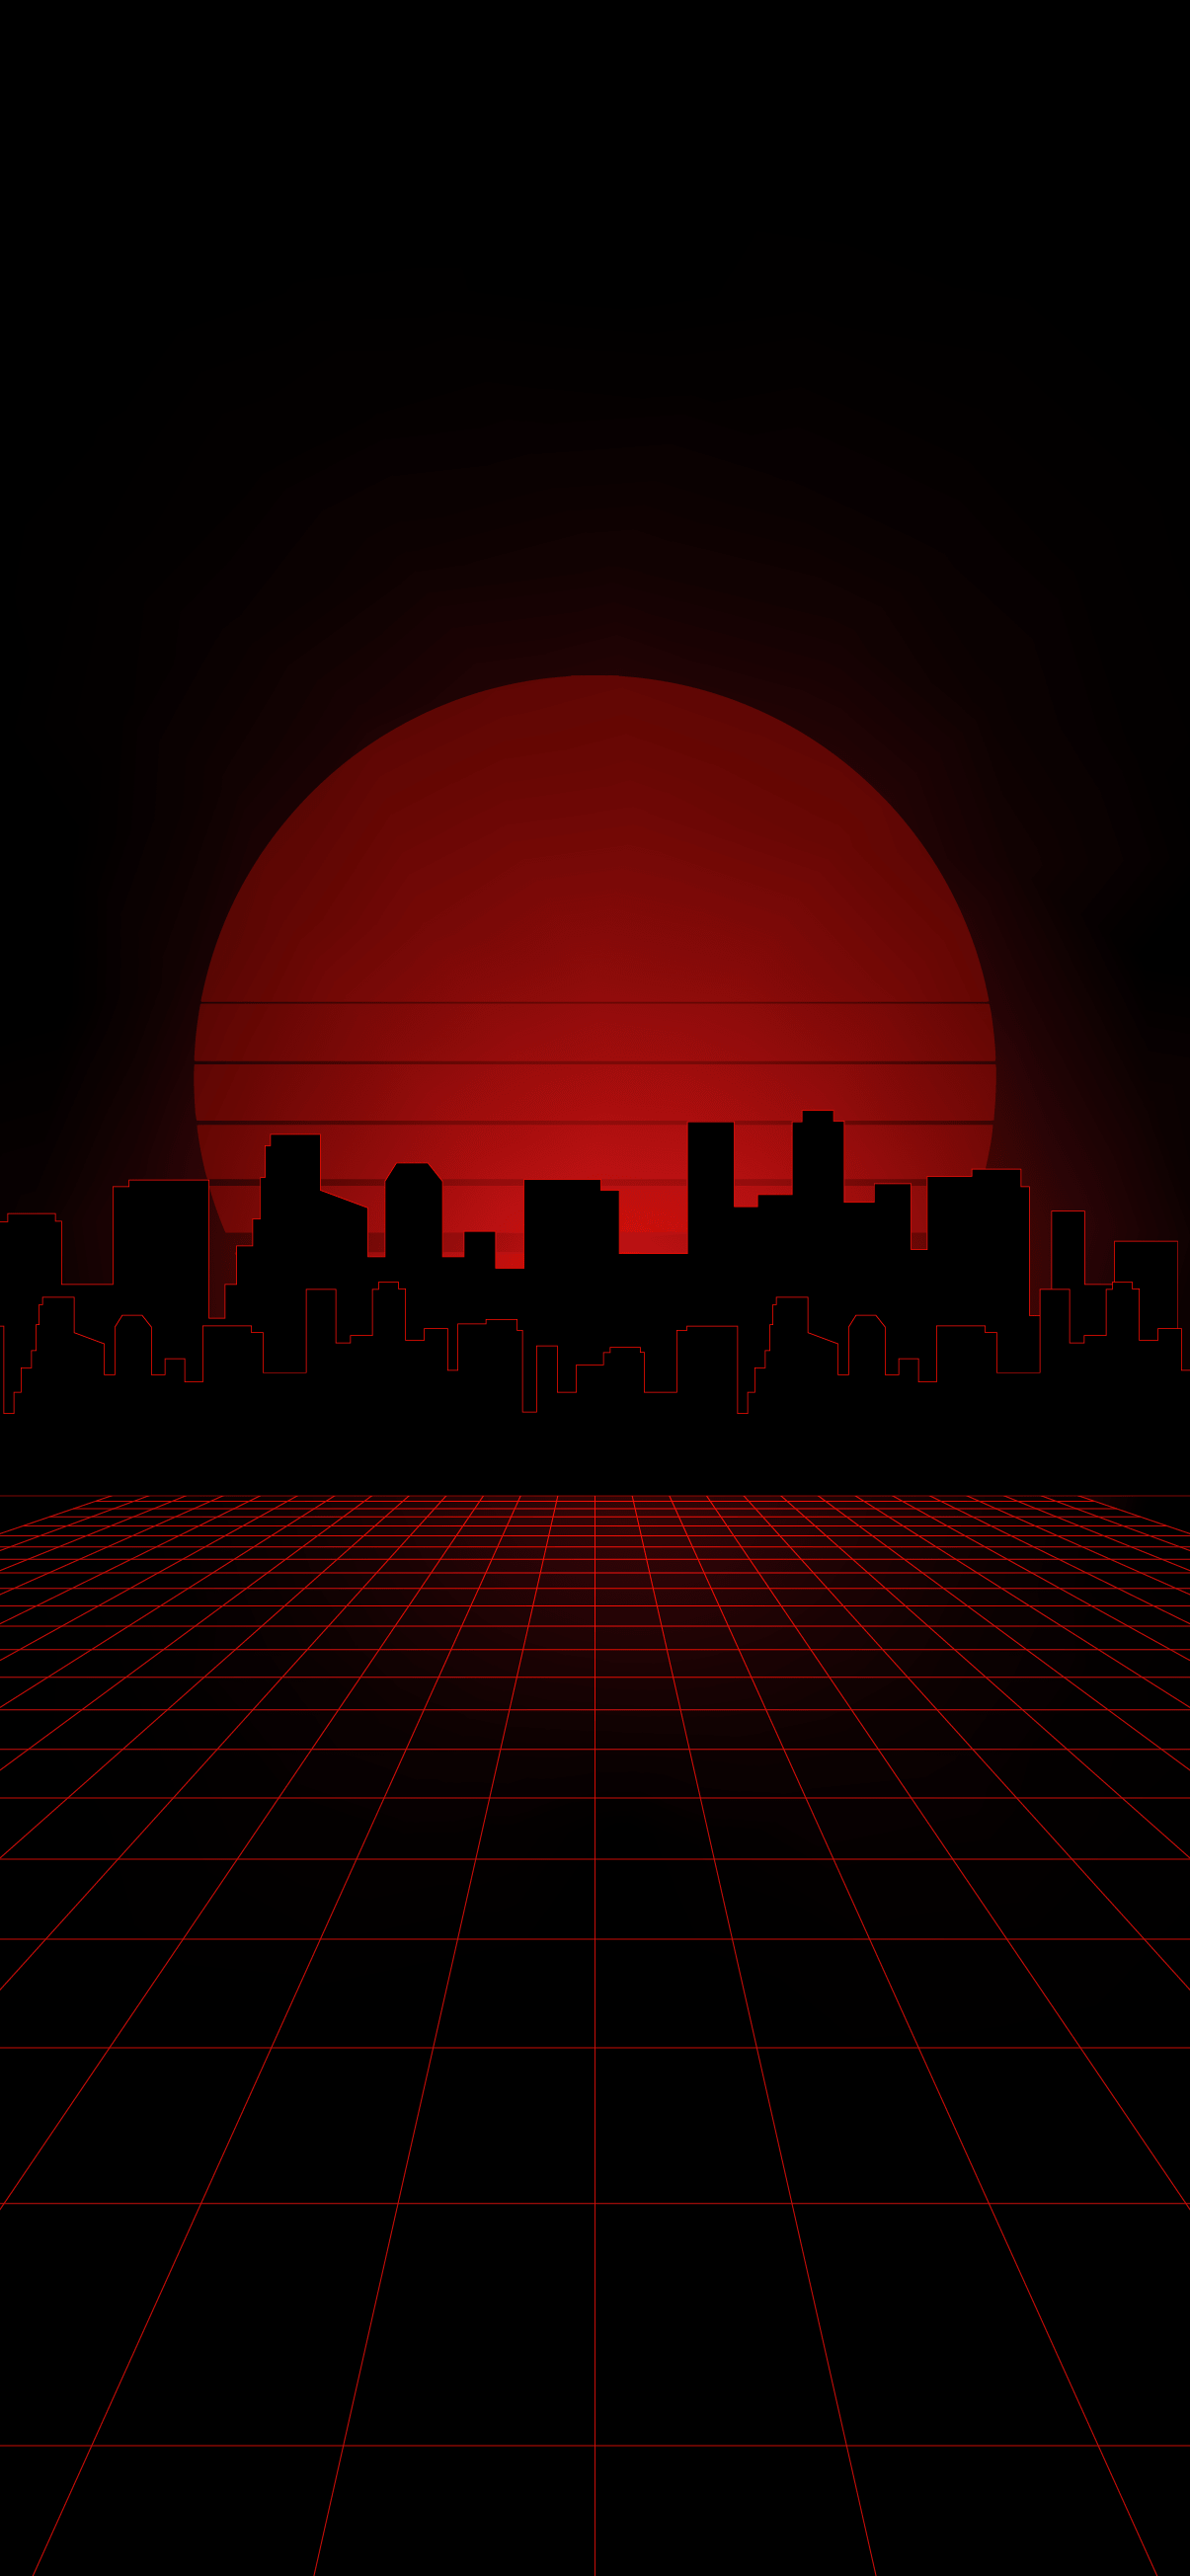 Aesthetic wallpaper of a cityscape with a red sun in the background - Vaporwave, synthwave